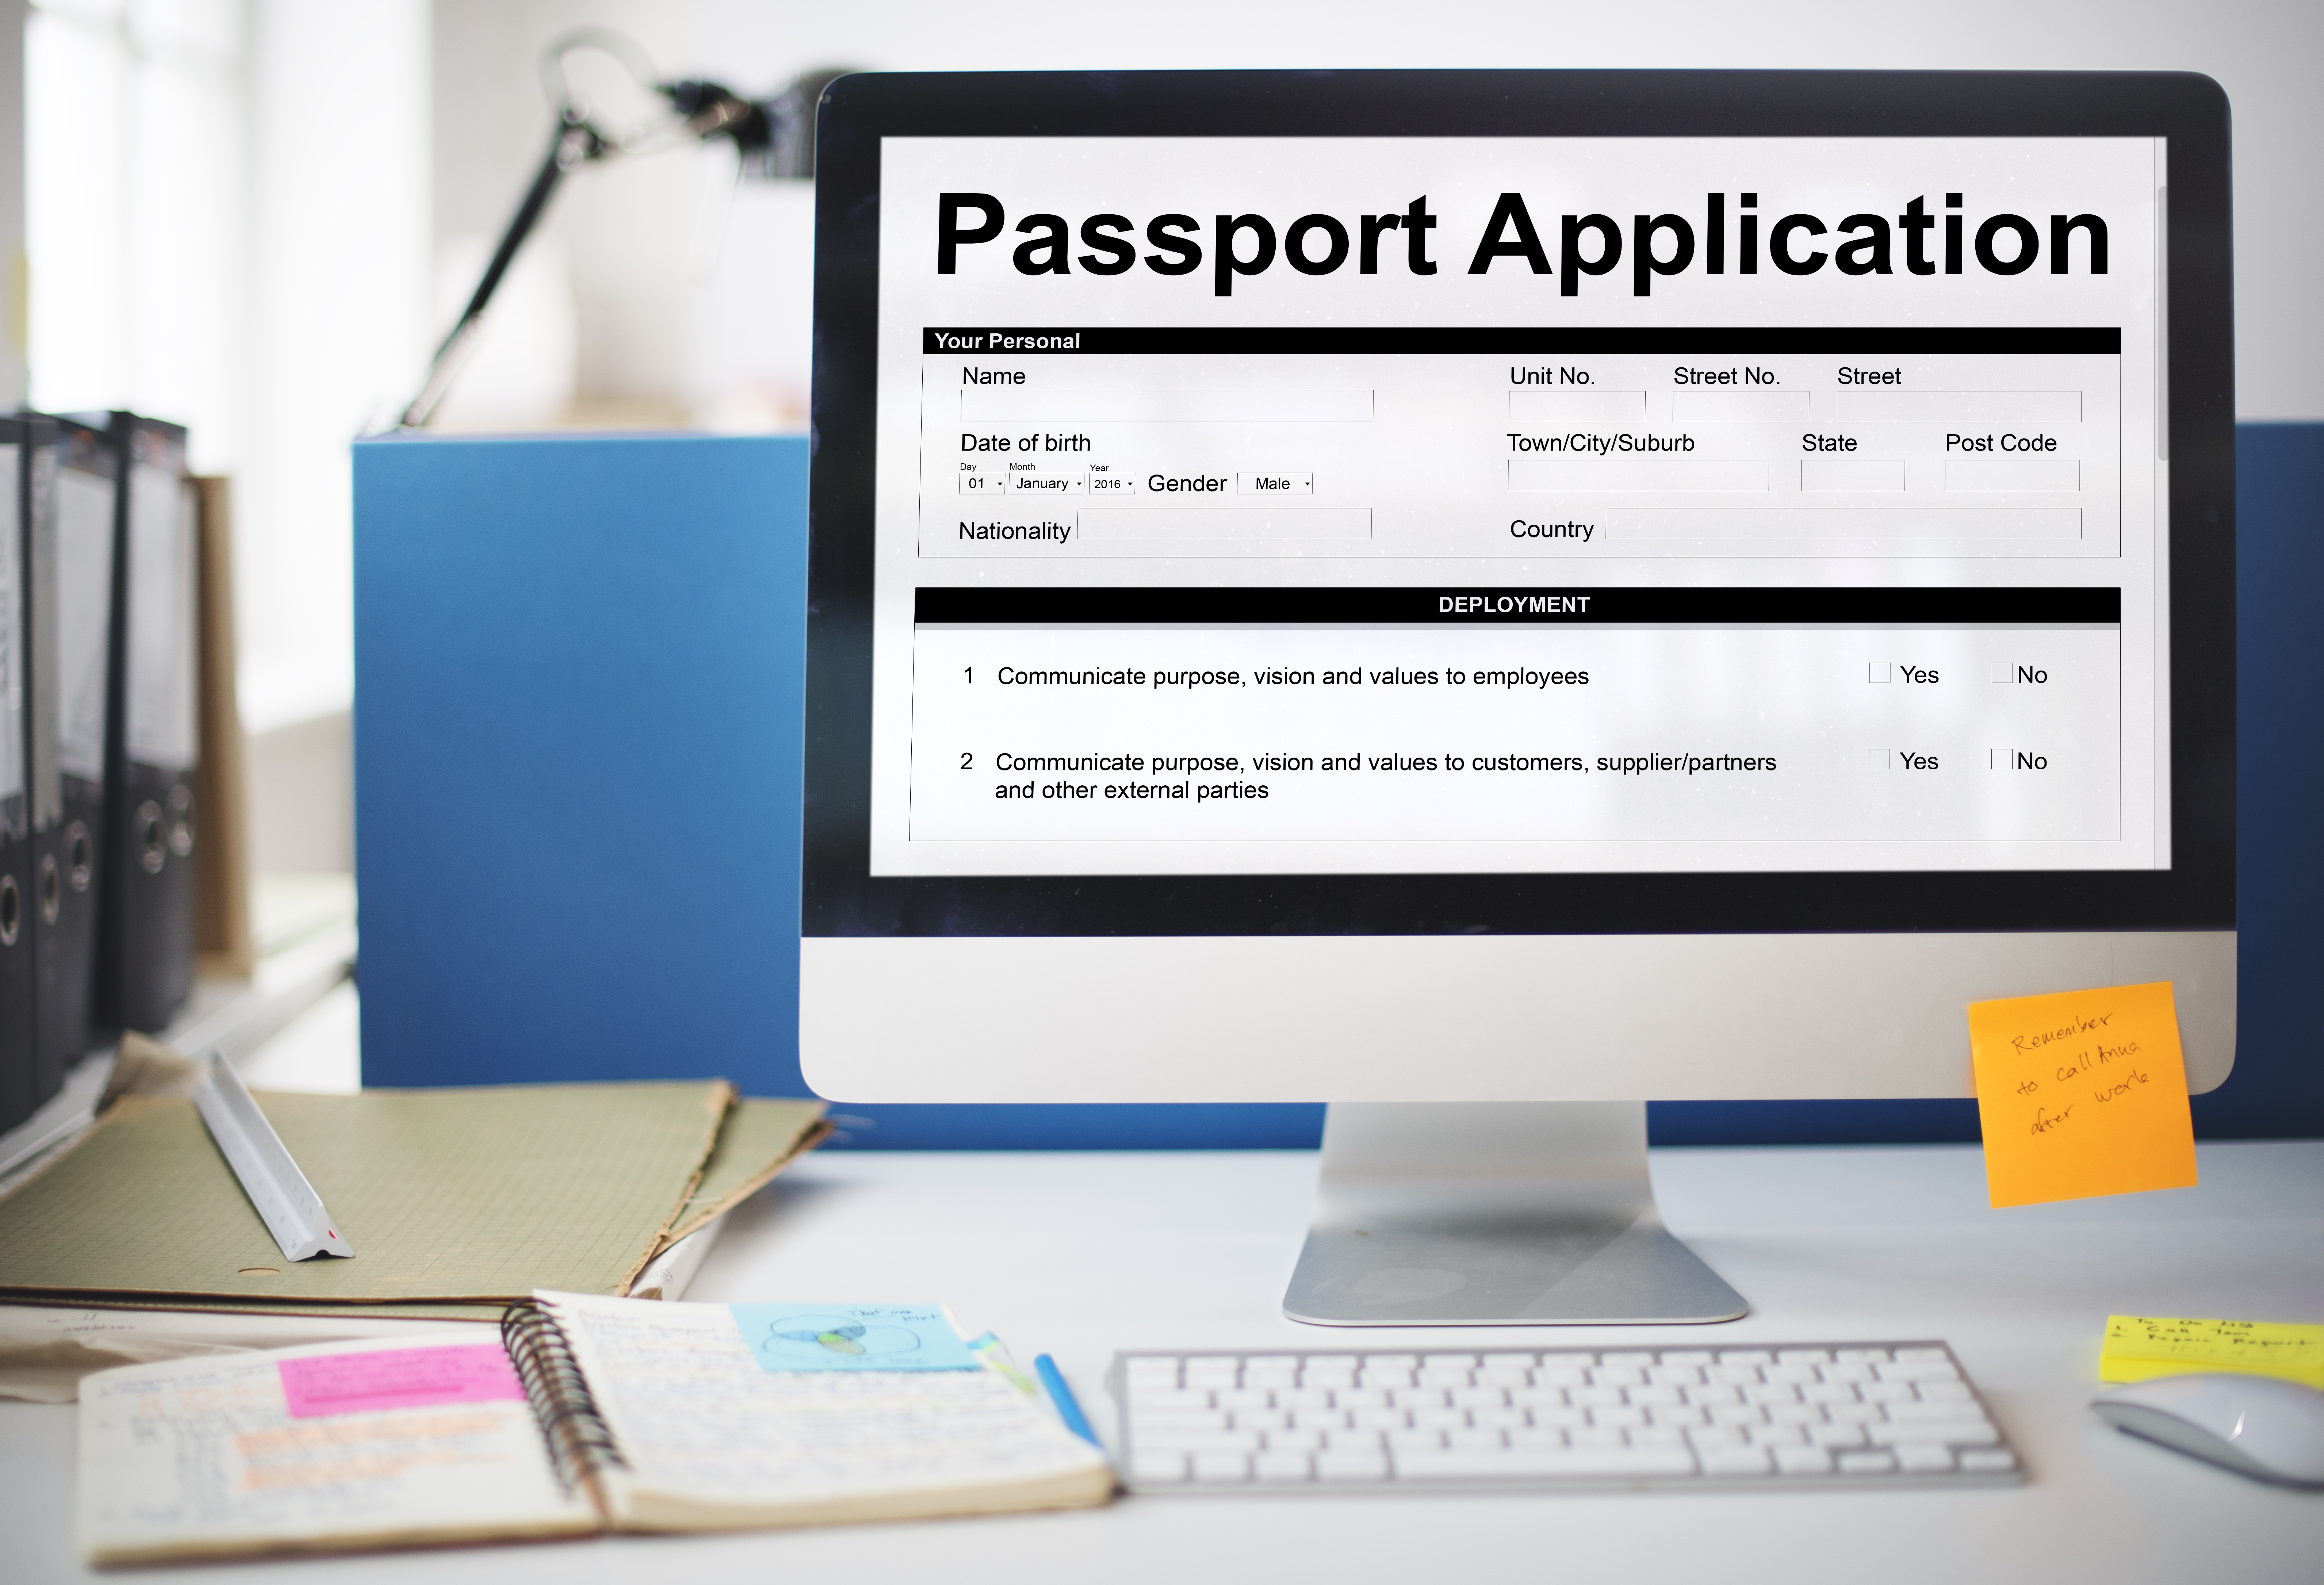 Need a Passport for an Amazing Family Vacation? Don't Do These Things - Passport Application on a Computer